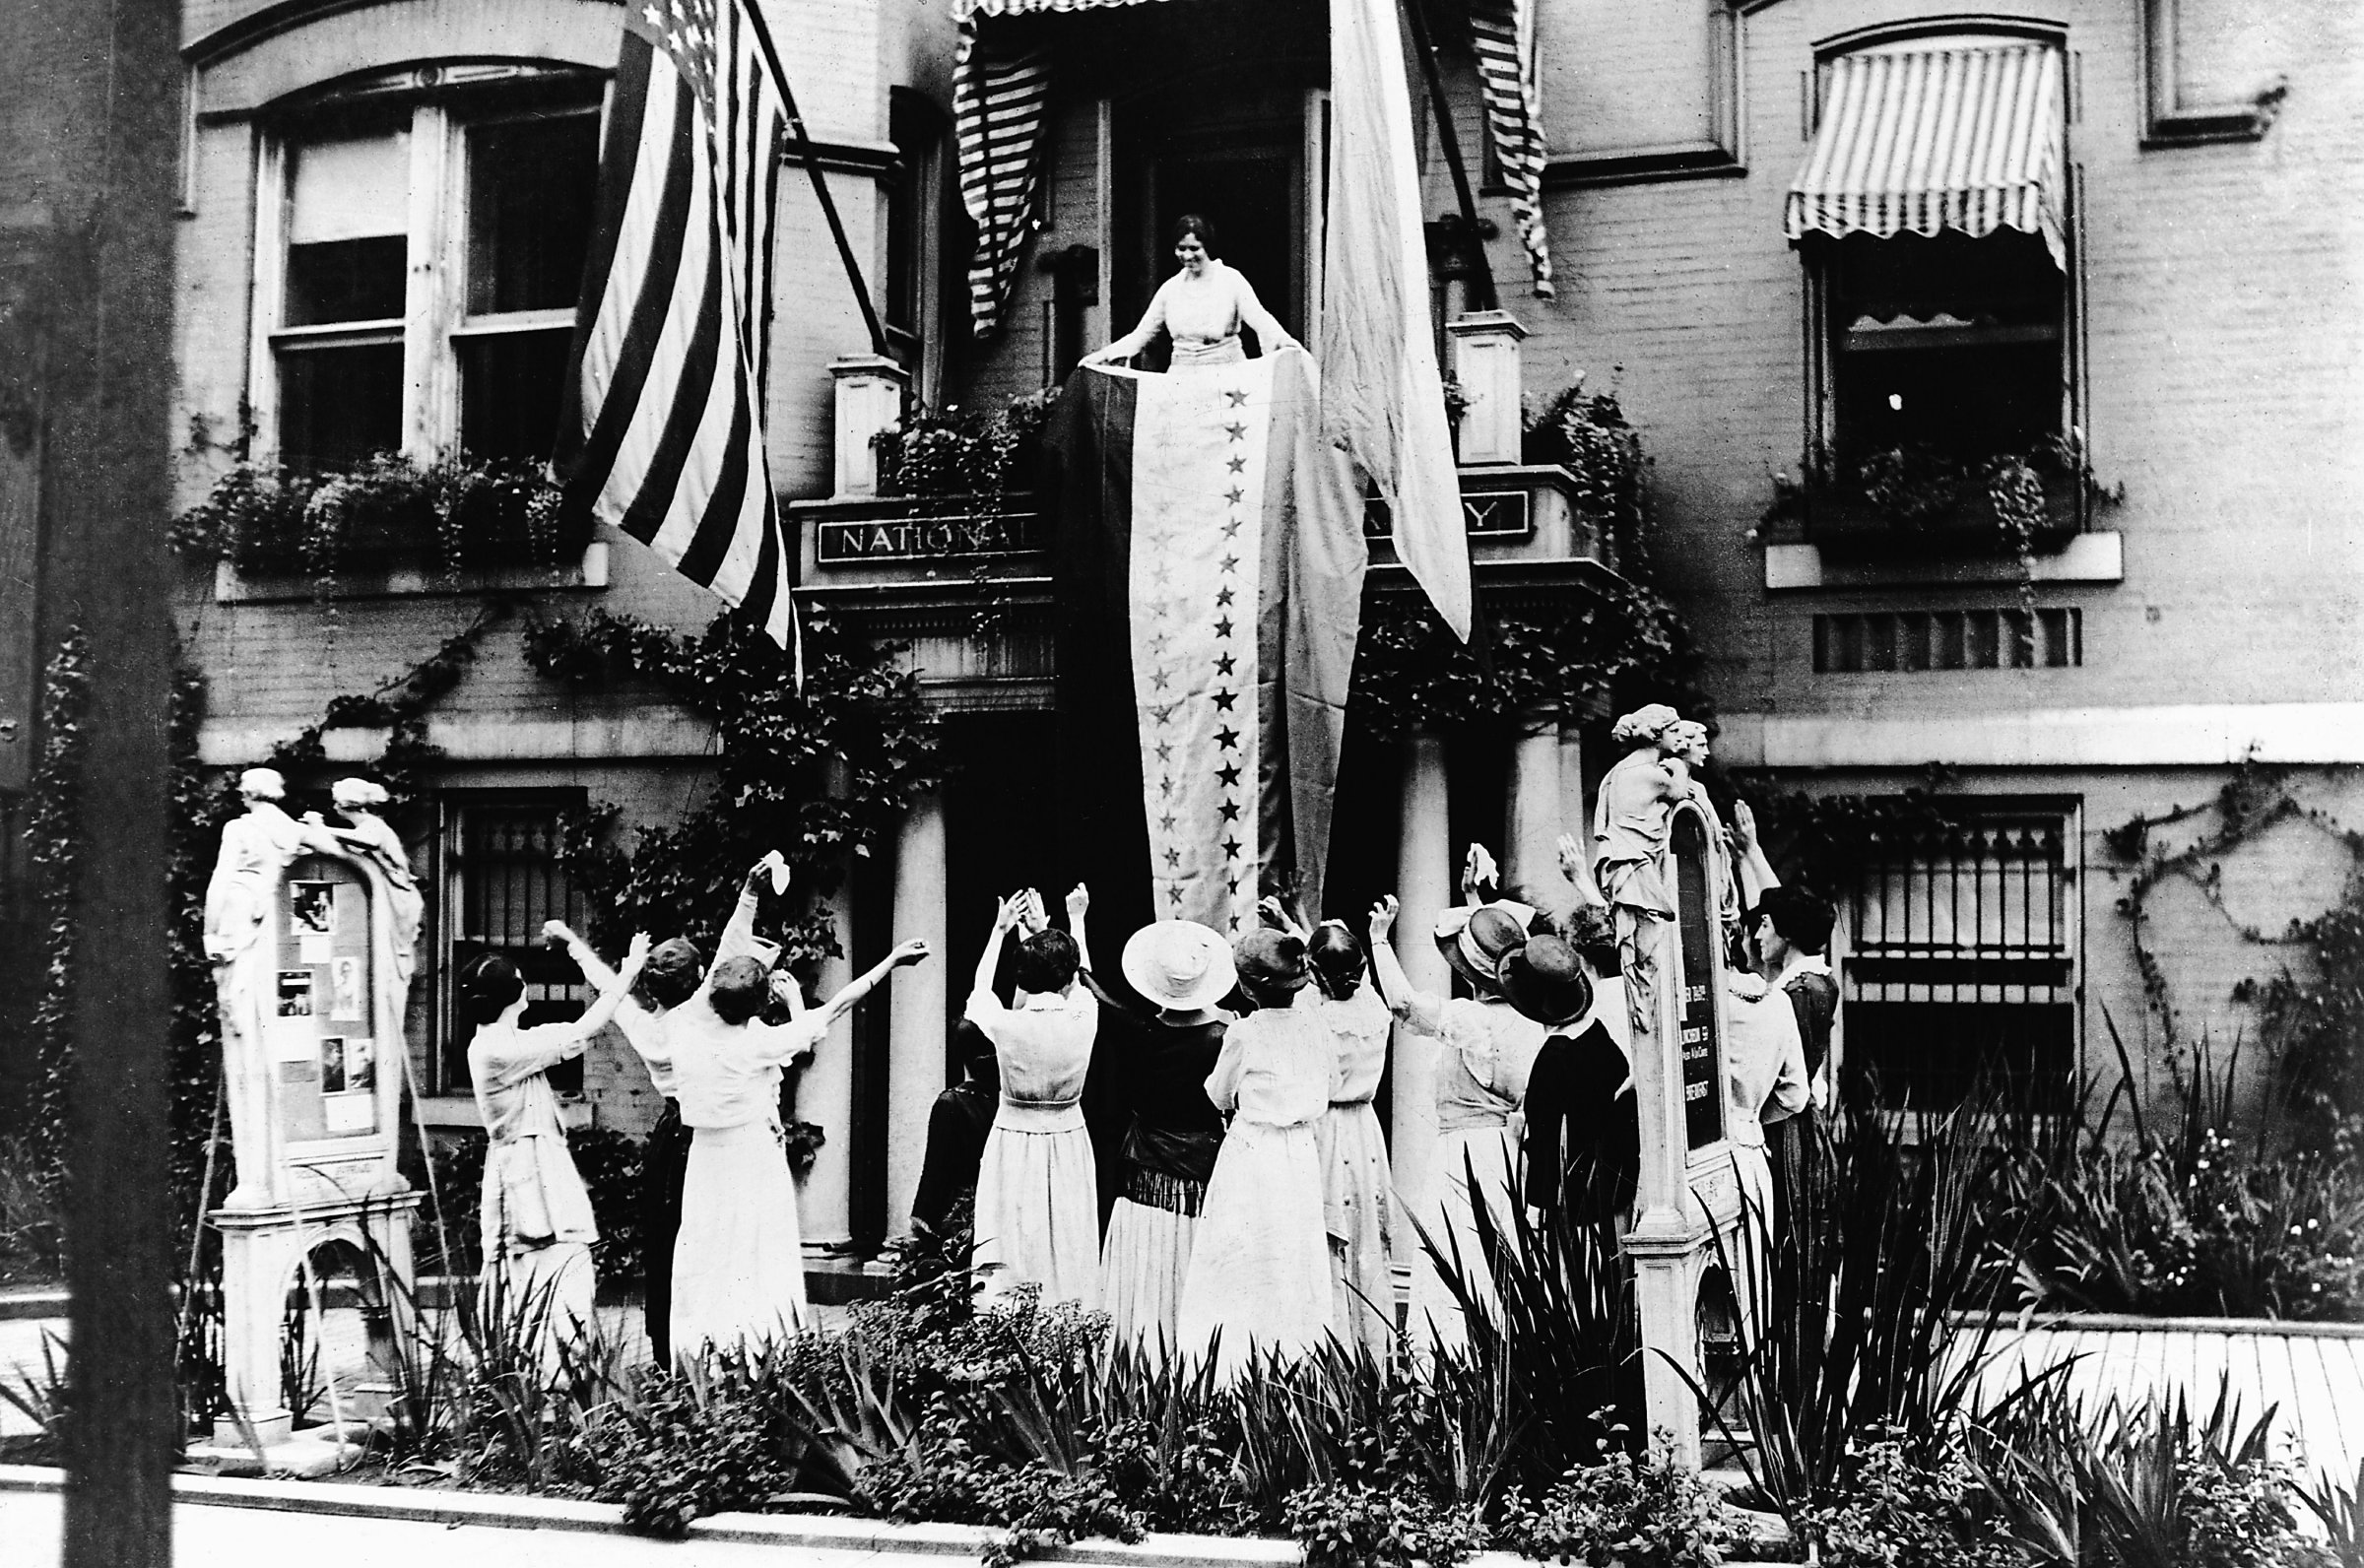 Women celebrate the passing of the 19th Amendment